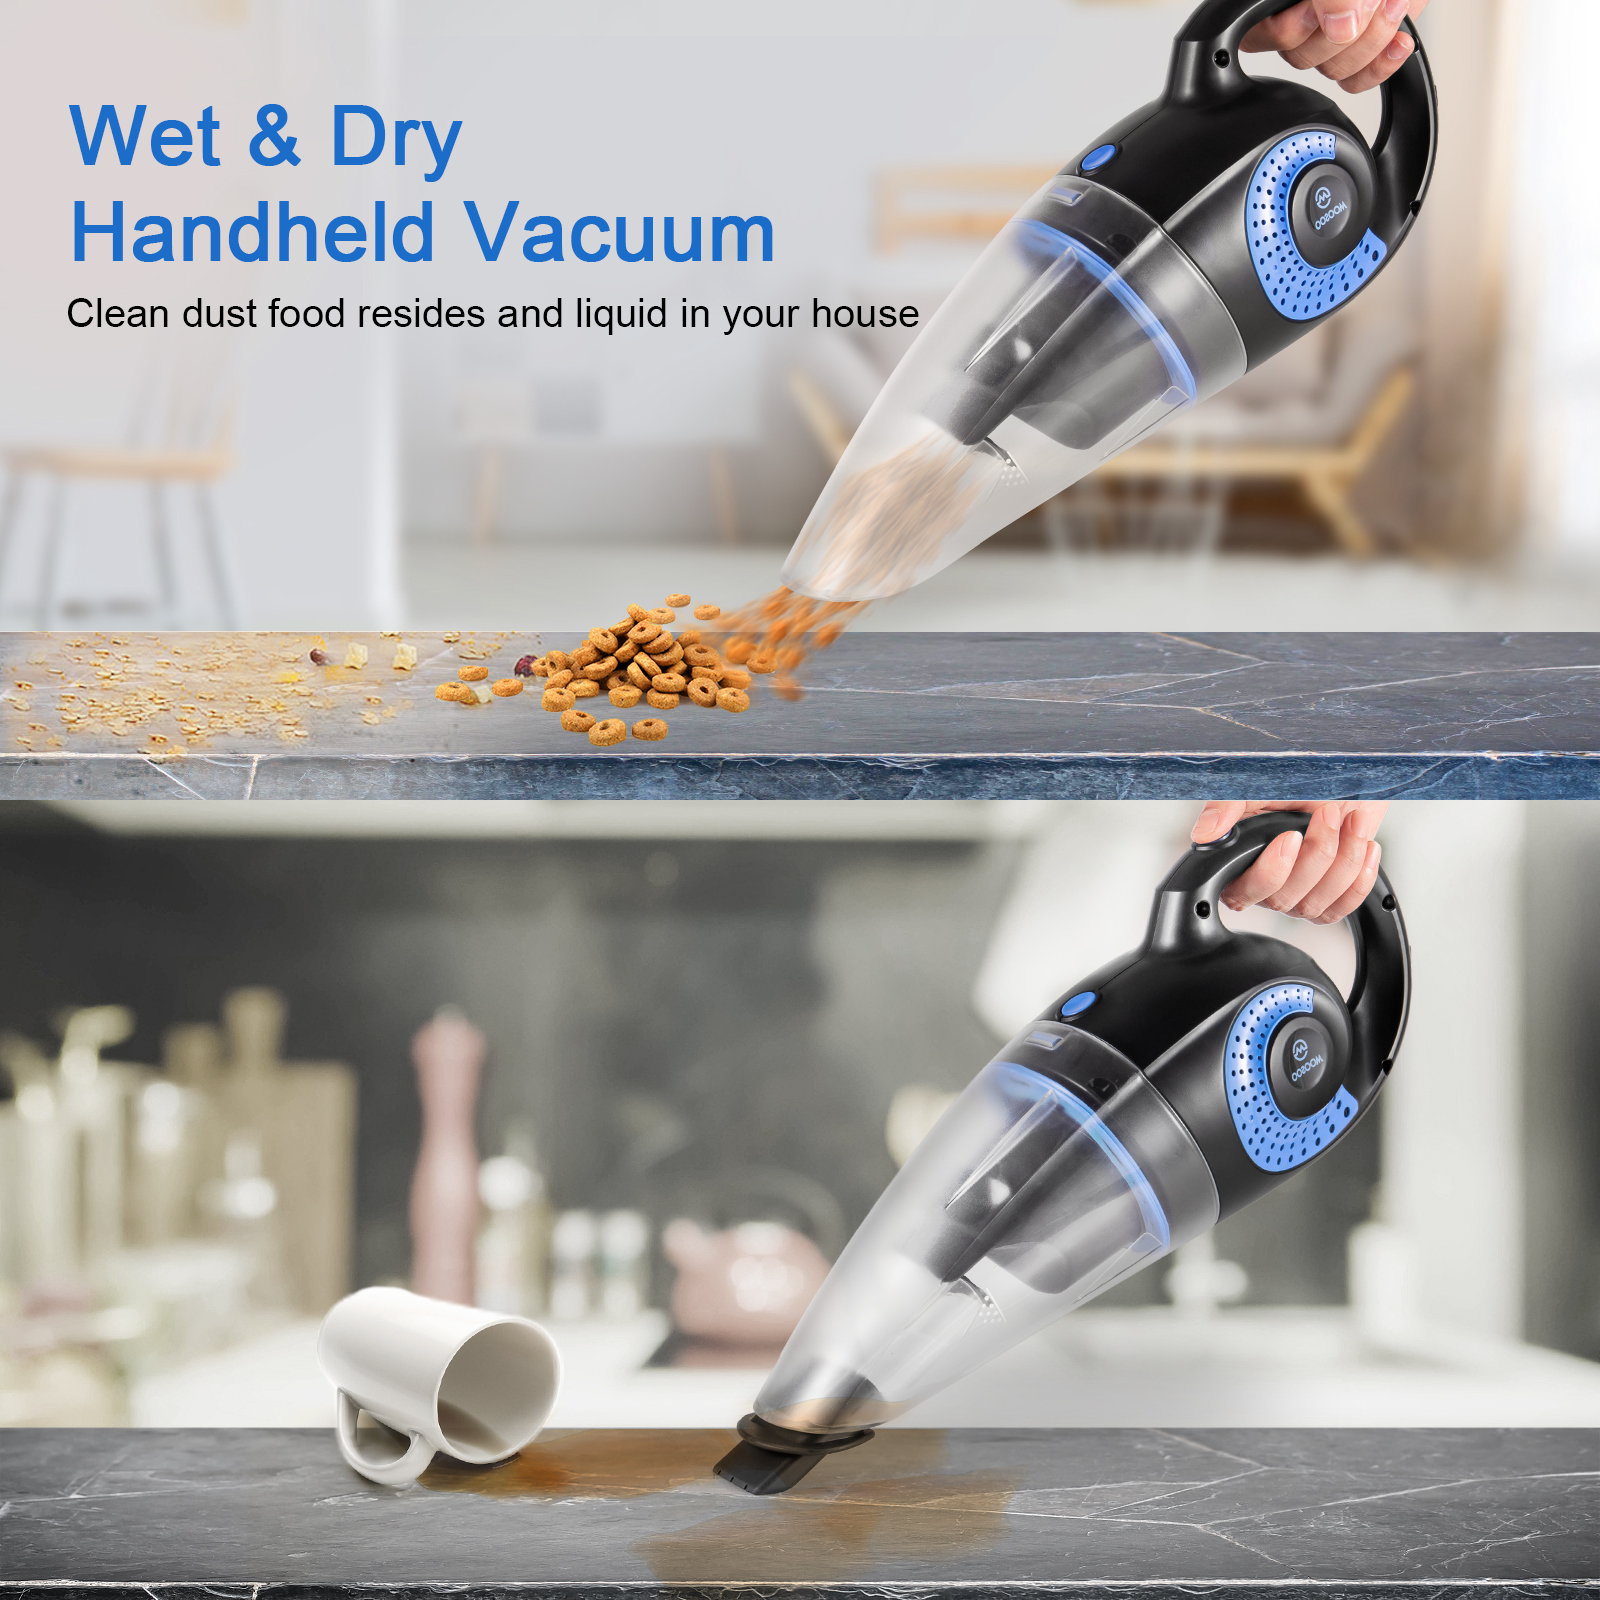 Moosoo Strong Suction handheld Vacuum Cleaner, Cordless Hand Vacuum, Rechargeable Handy Vac for Car & Pet Hair - image 4 of 7